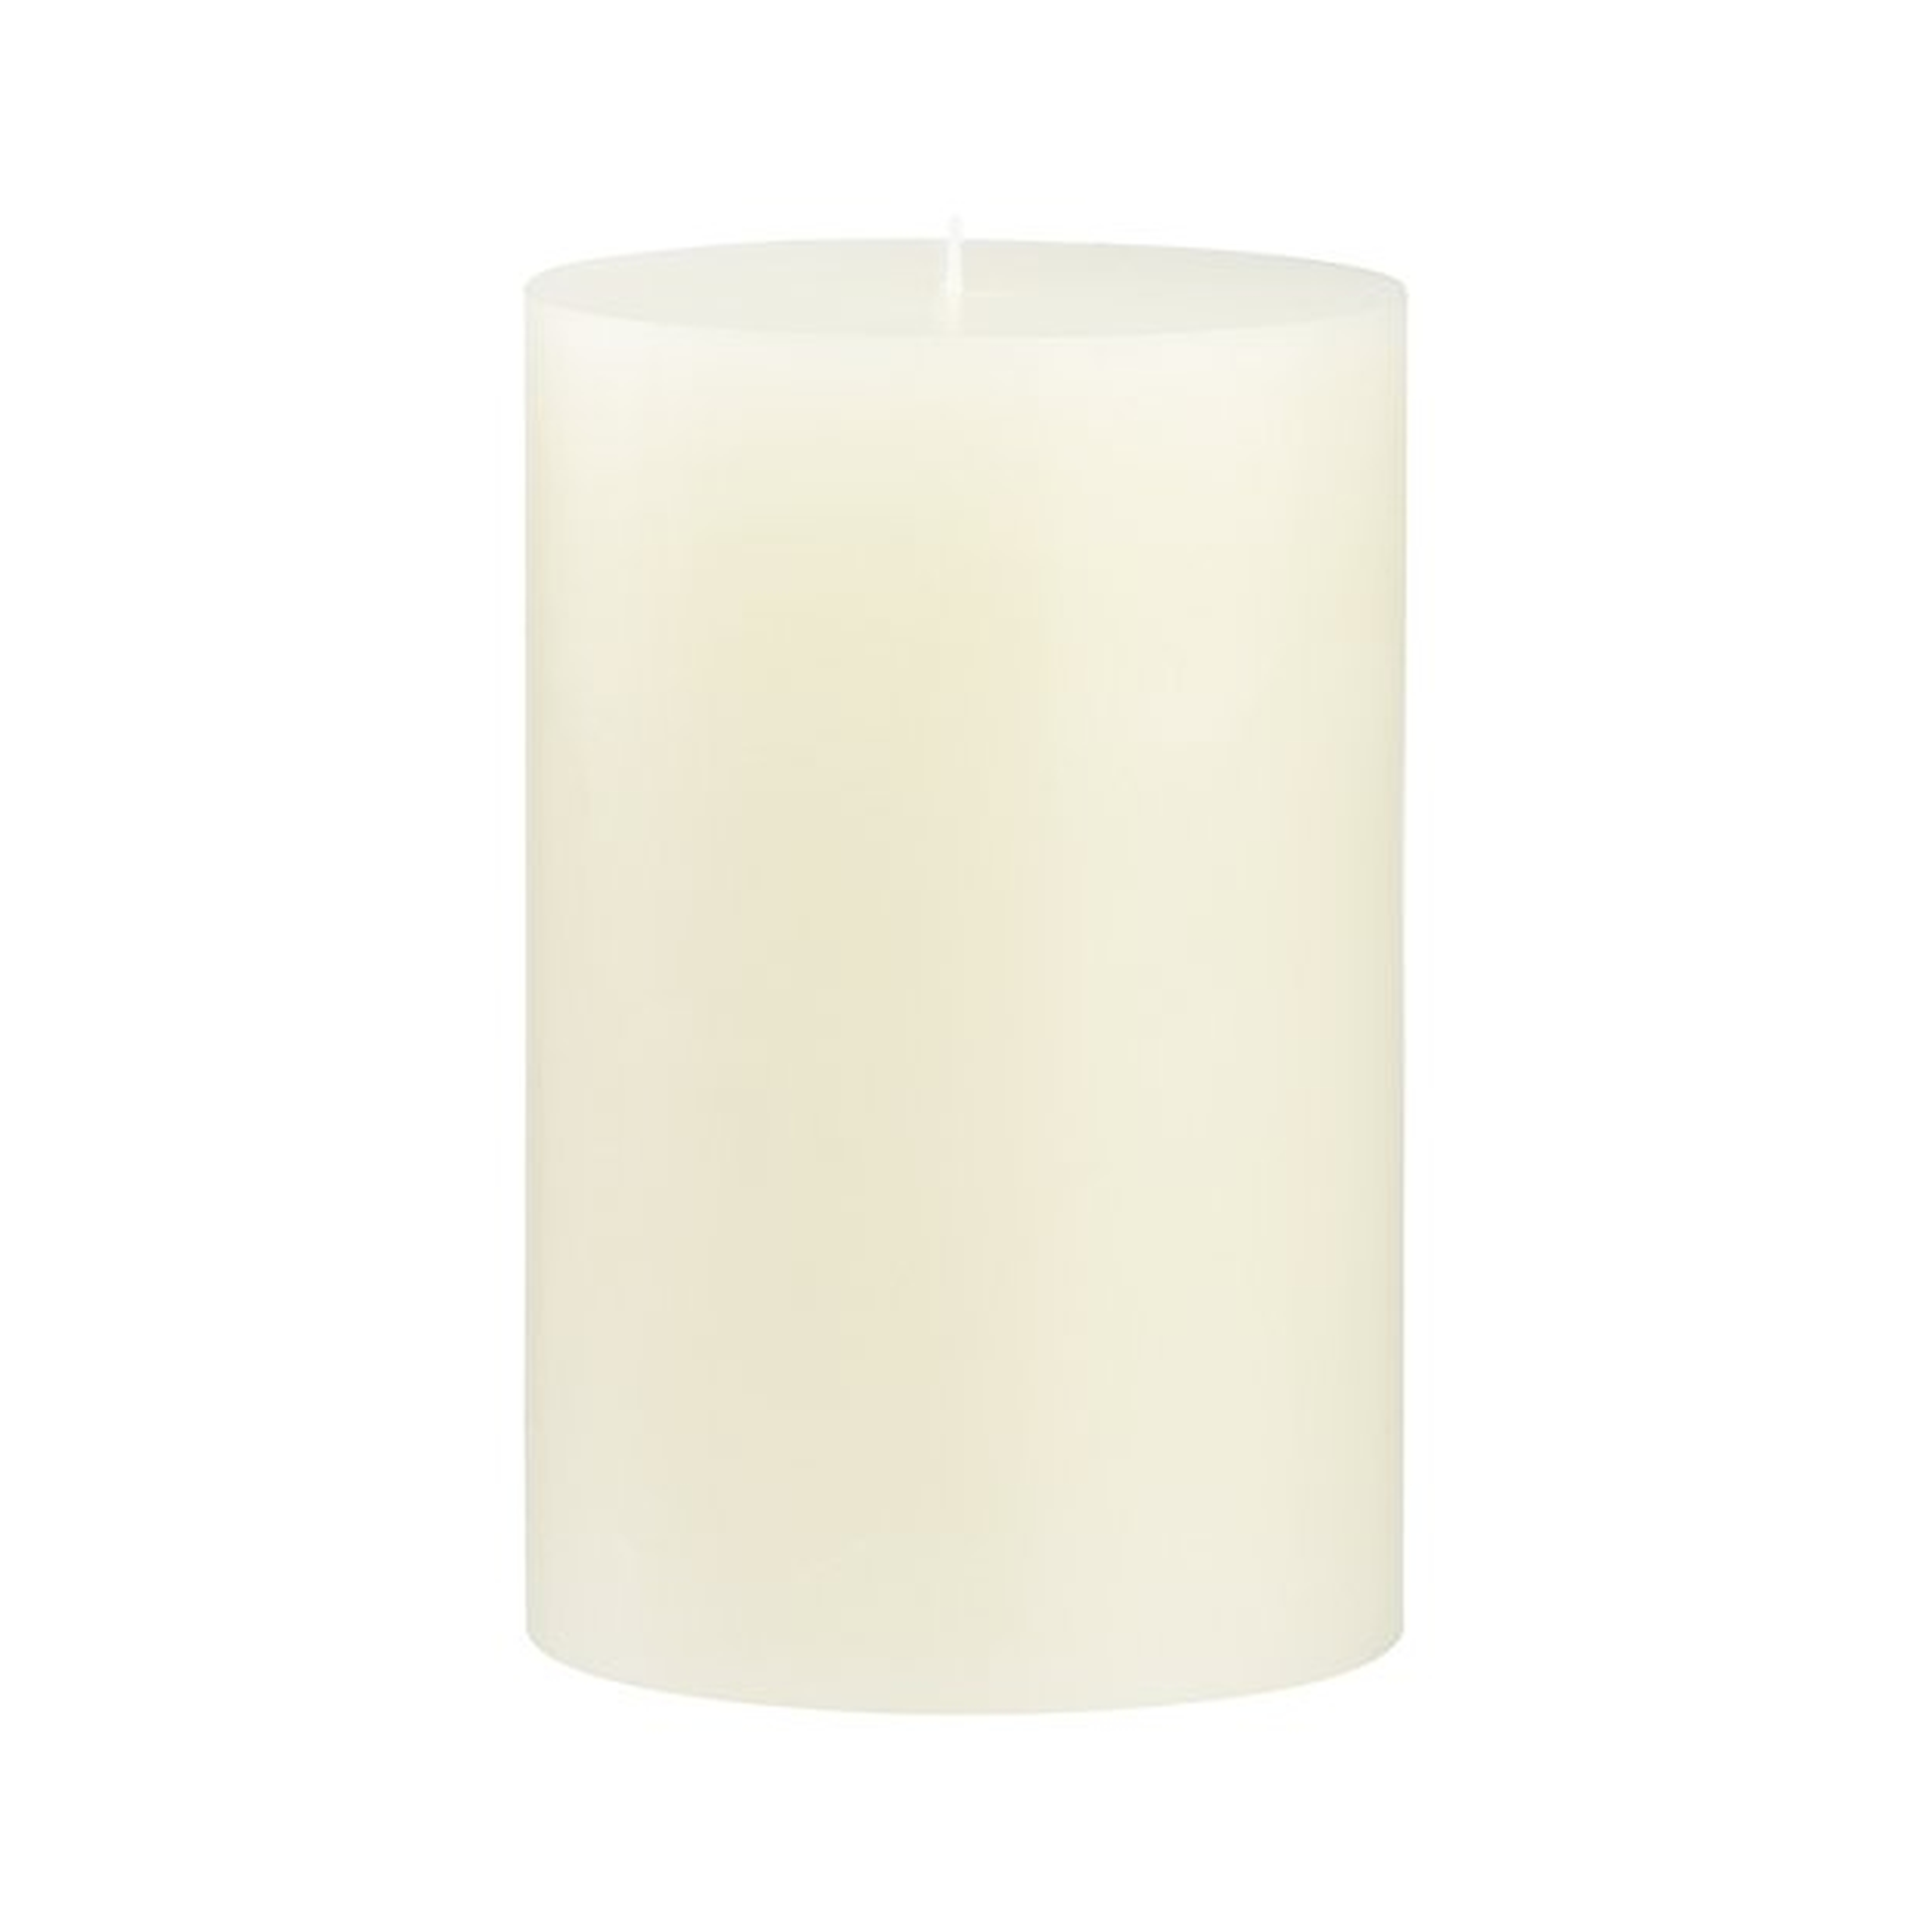 Ivory Pillar Candle 3x4 - Crate and Barrel